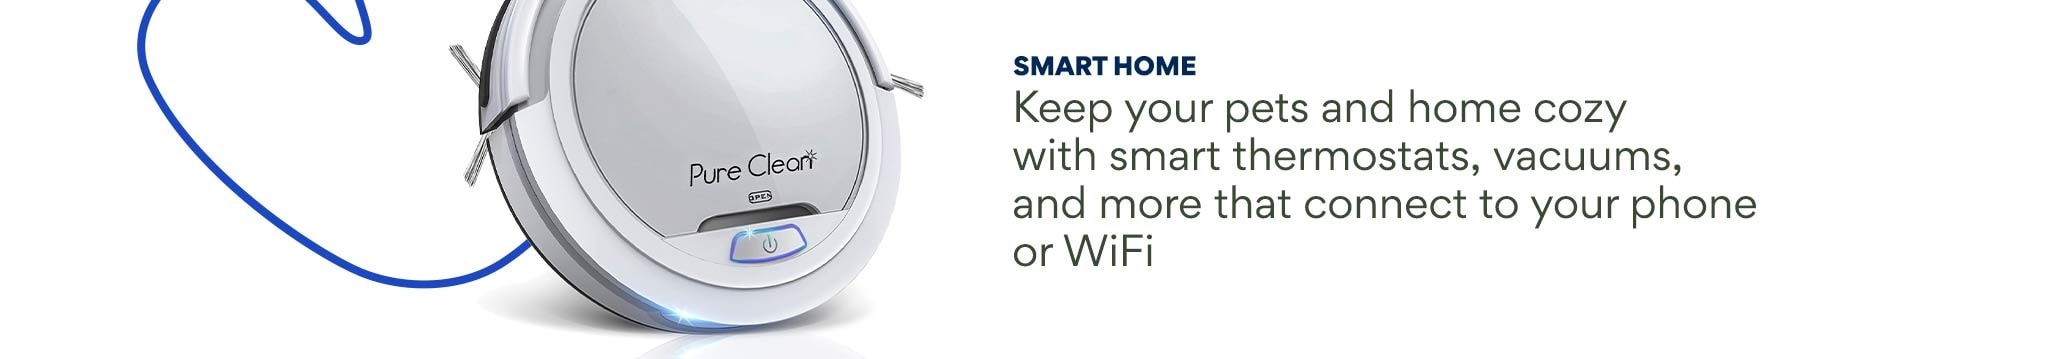 Smart Home. Keep your pets and home cozy with smart thermostats, vacuums, and more that connect to your phone or WiFi